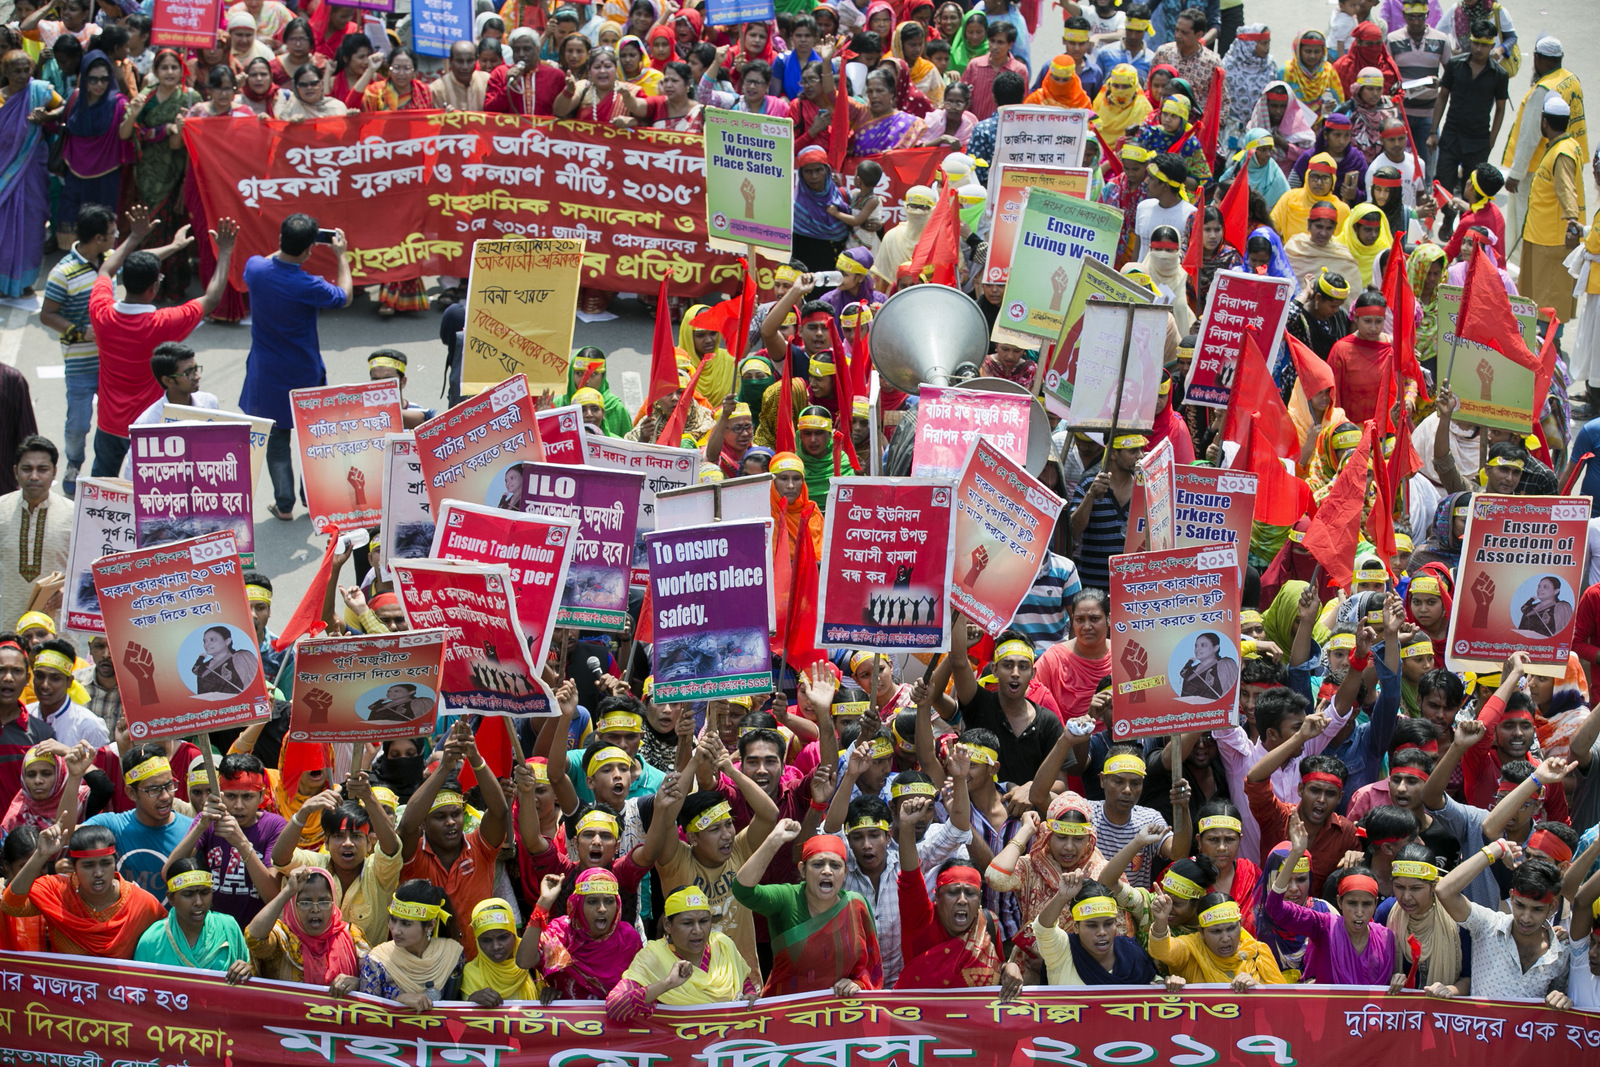 Bangladeshi workers and activists shout slogans as they participate in a May Day rally in Dhaka, Bangladesh, Monday, May 1, 2017. Thousands of workers and activists marched during International Workers' Day demanding higher wages and better work conditions. 